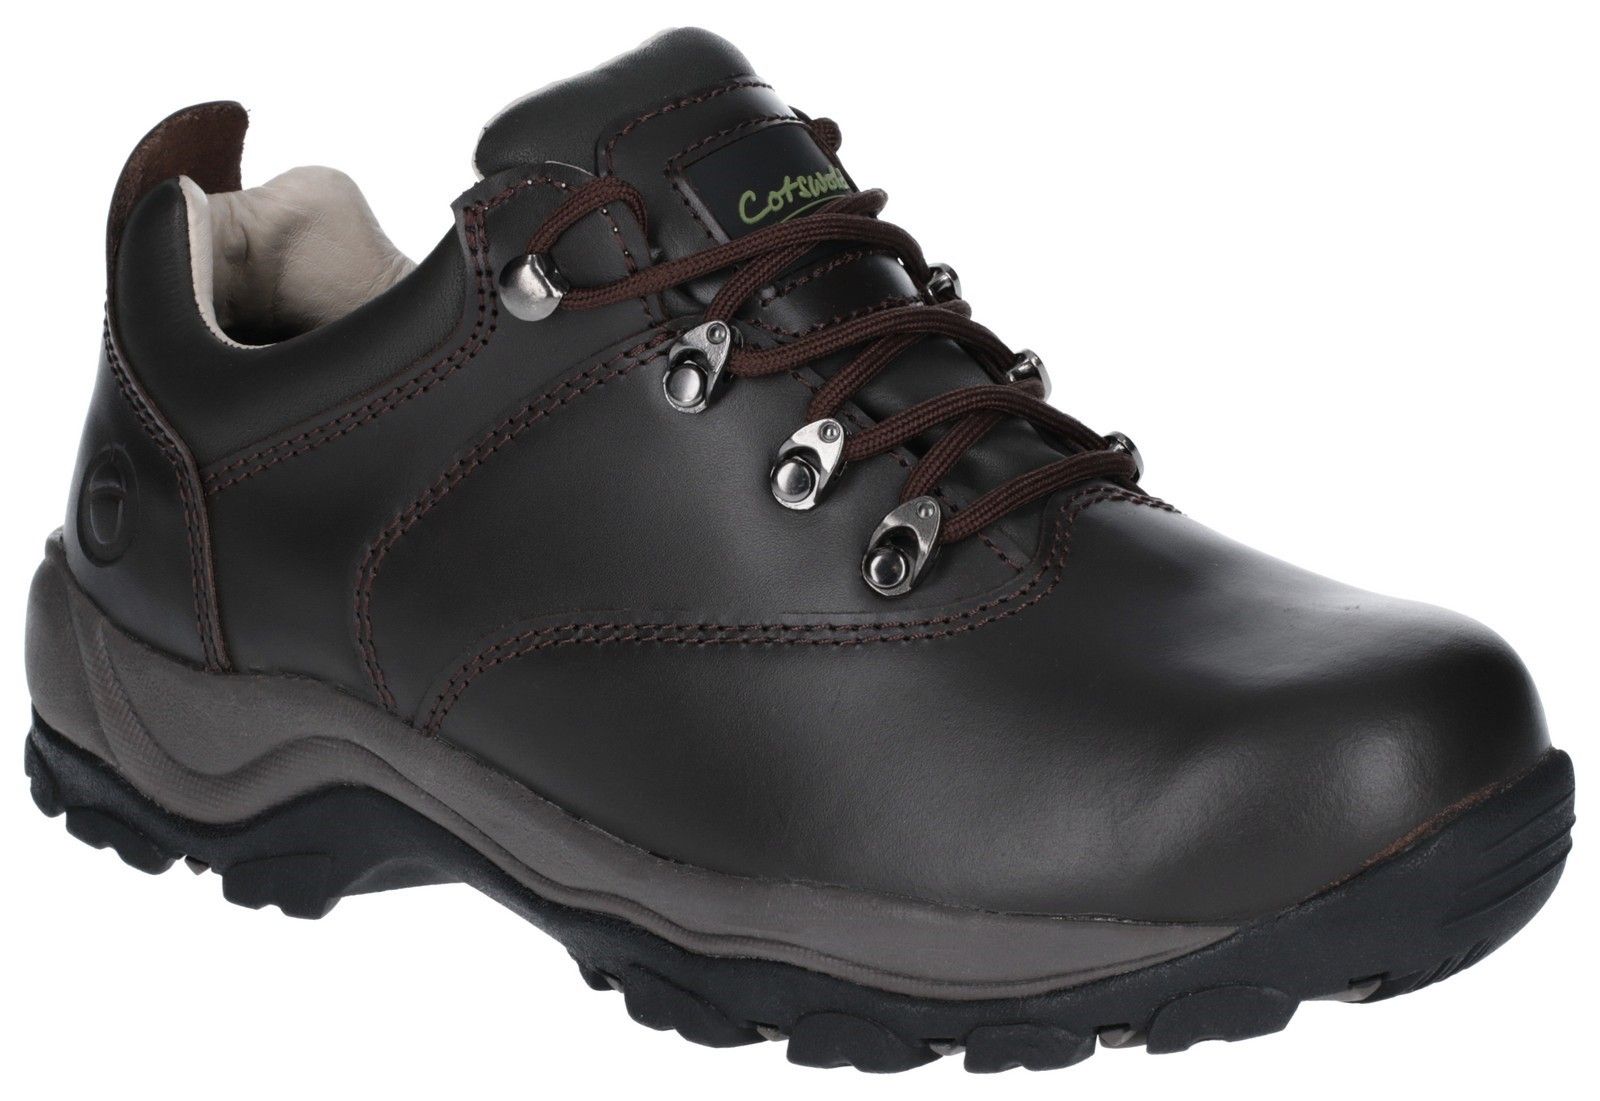 A classic leather trail and hill walking shoe from Cotswold with waterproof lining - a sure safe choice for the Great British Weather and a countryside hike.Crazy horse full grain leather upper. 
Waterproof breathable membrane. 
Dual padded leather lined collar. 
Metal lace rings with speed lacing. 
Cushioning EVA/Rubber sole.